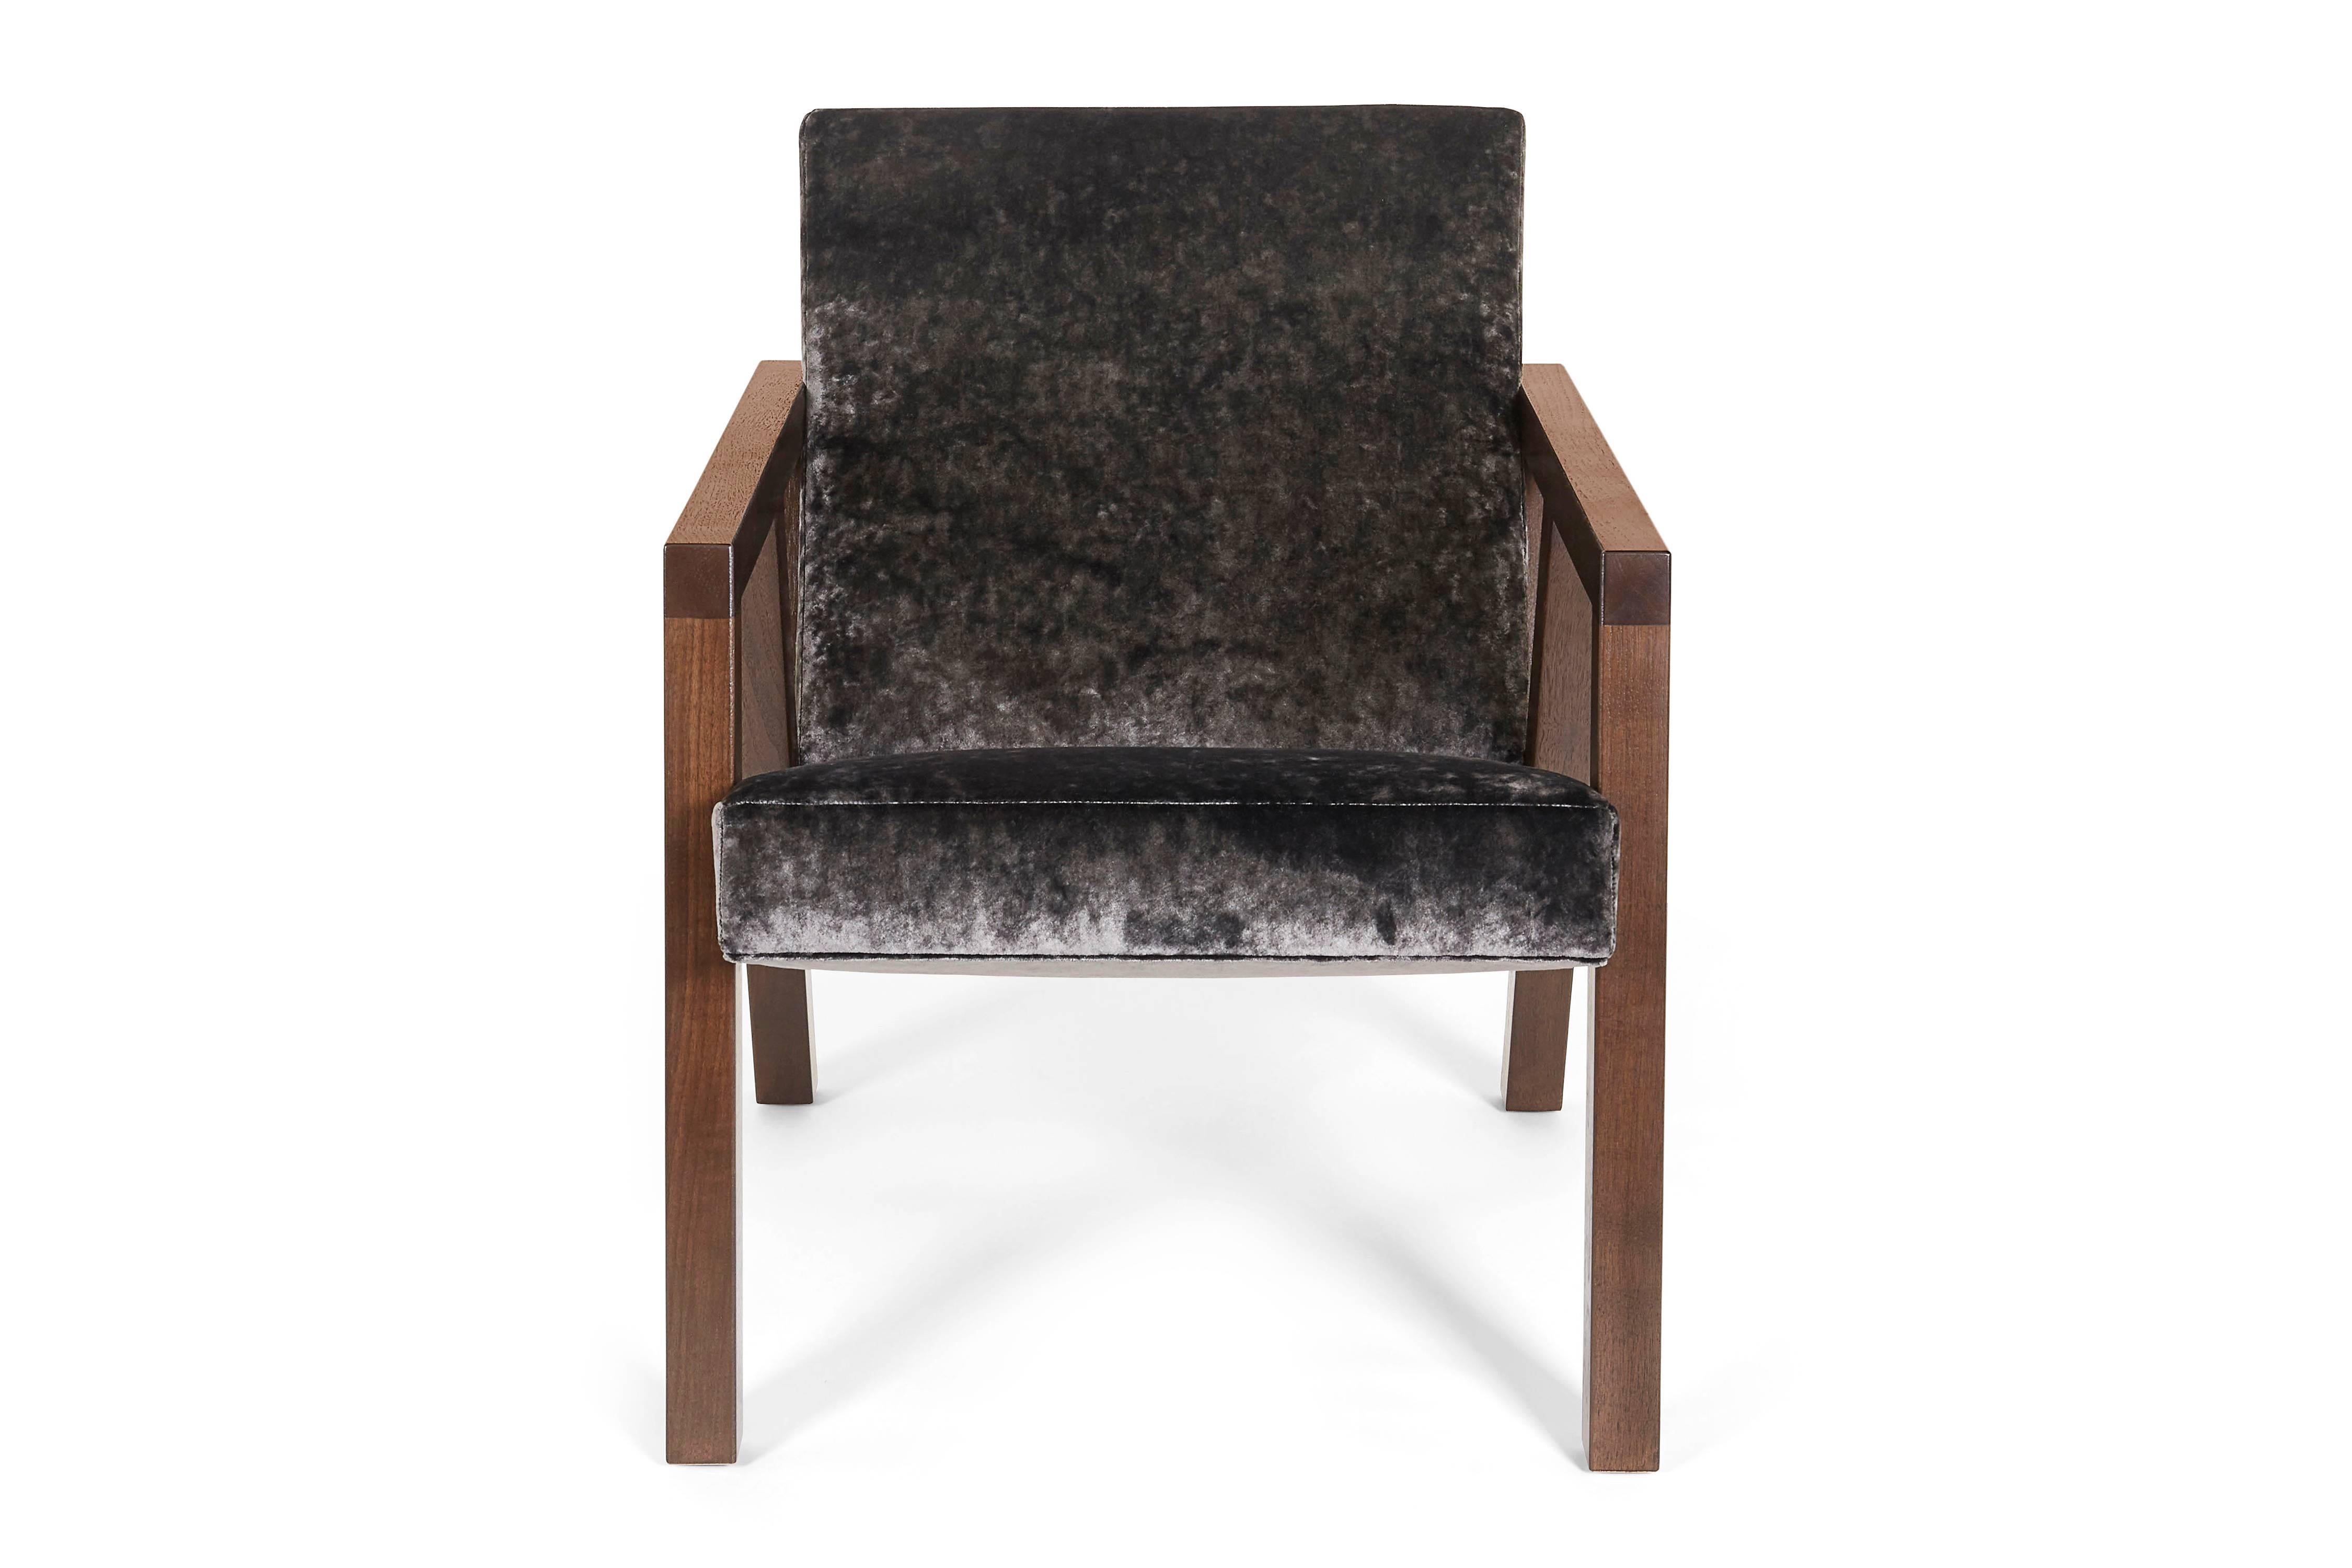 The moda chair is both timeless and modern. With sleek, angular walnut arms and legs and plush velvet upholstery, it manages to be both functional and chic.